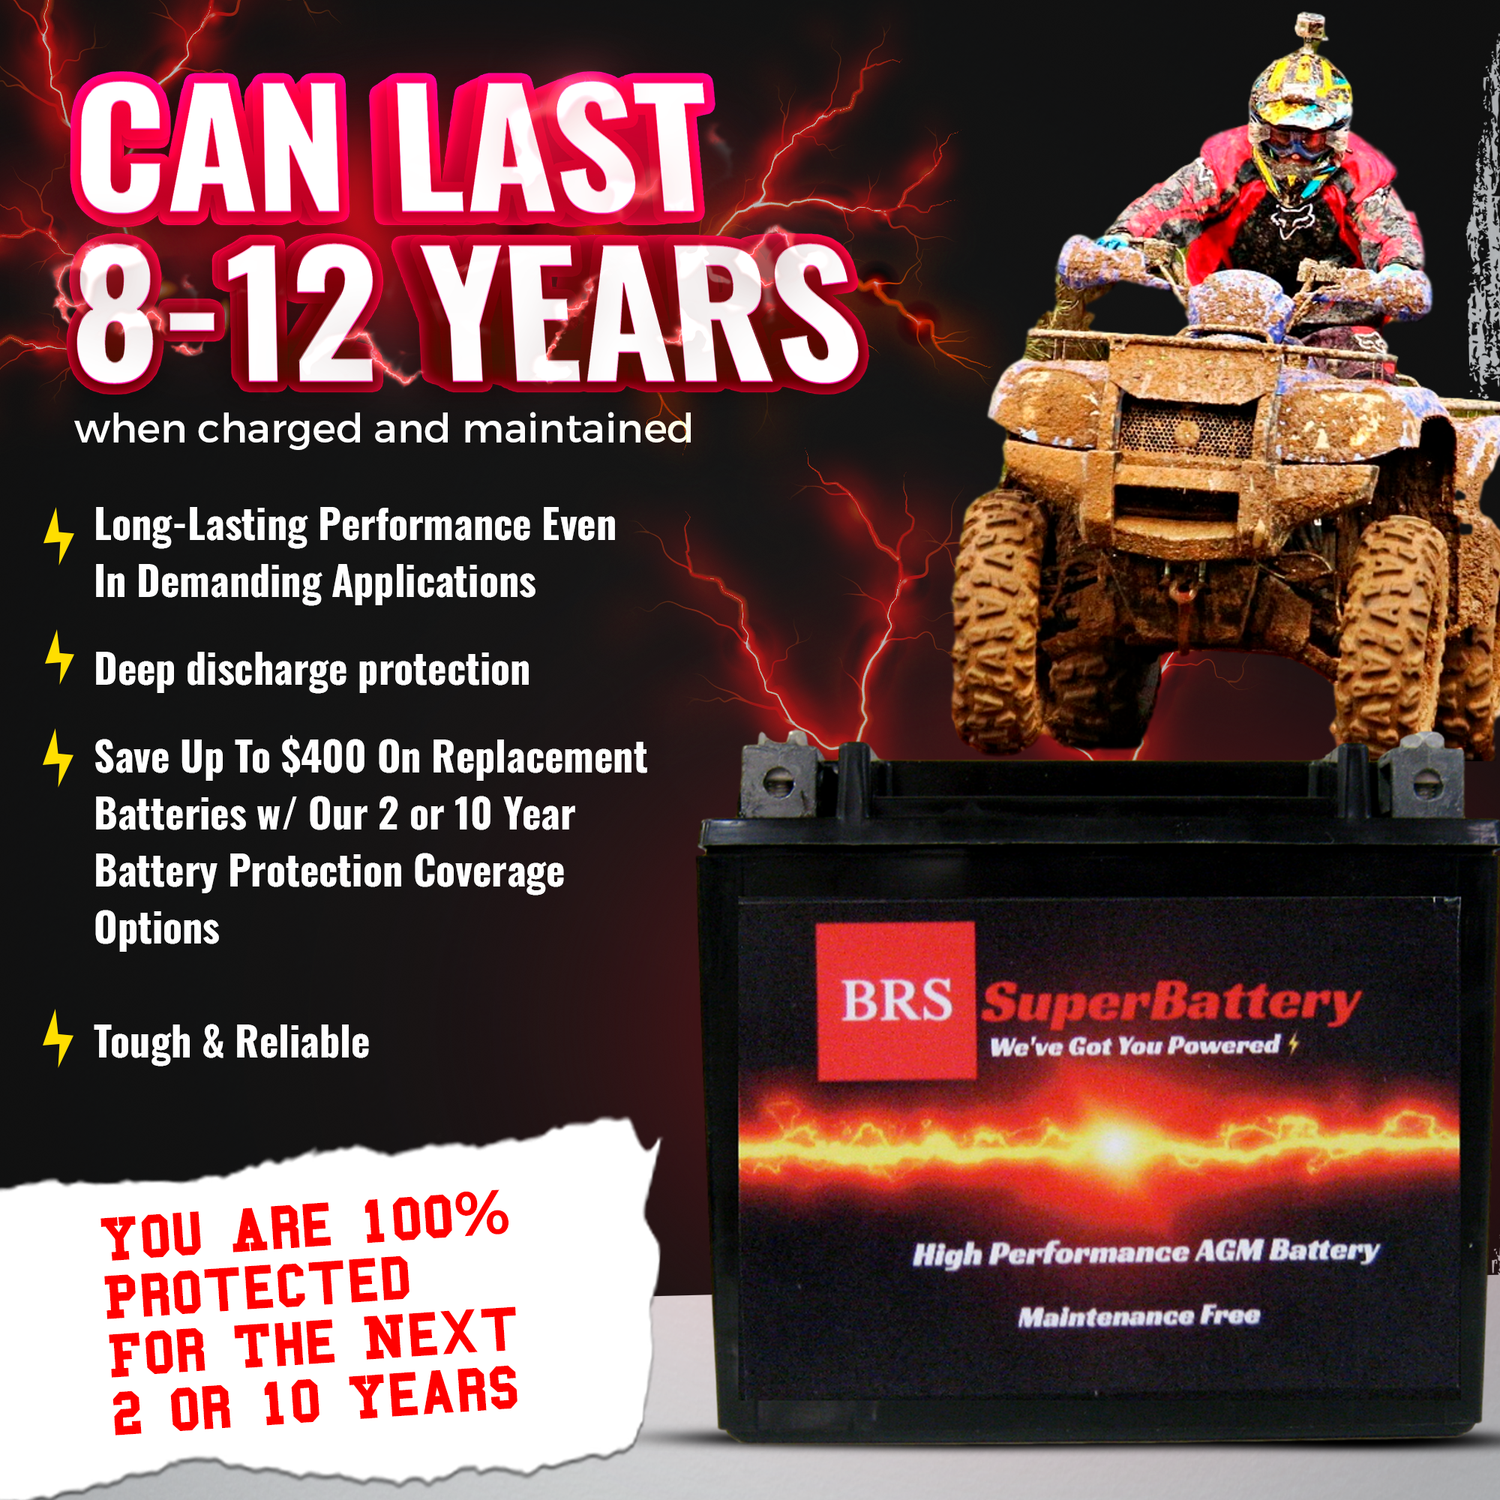 BRS20-BS 12v High Performance Sealed AGM PowerSport 10 Year Battery - BRS Super Battery